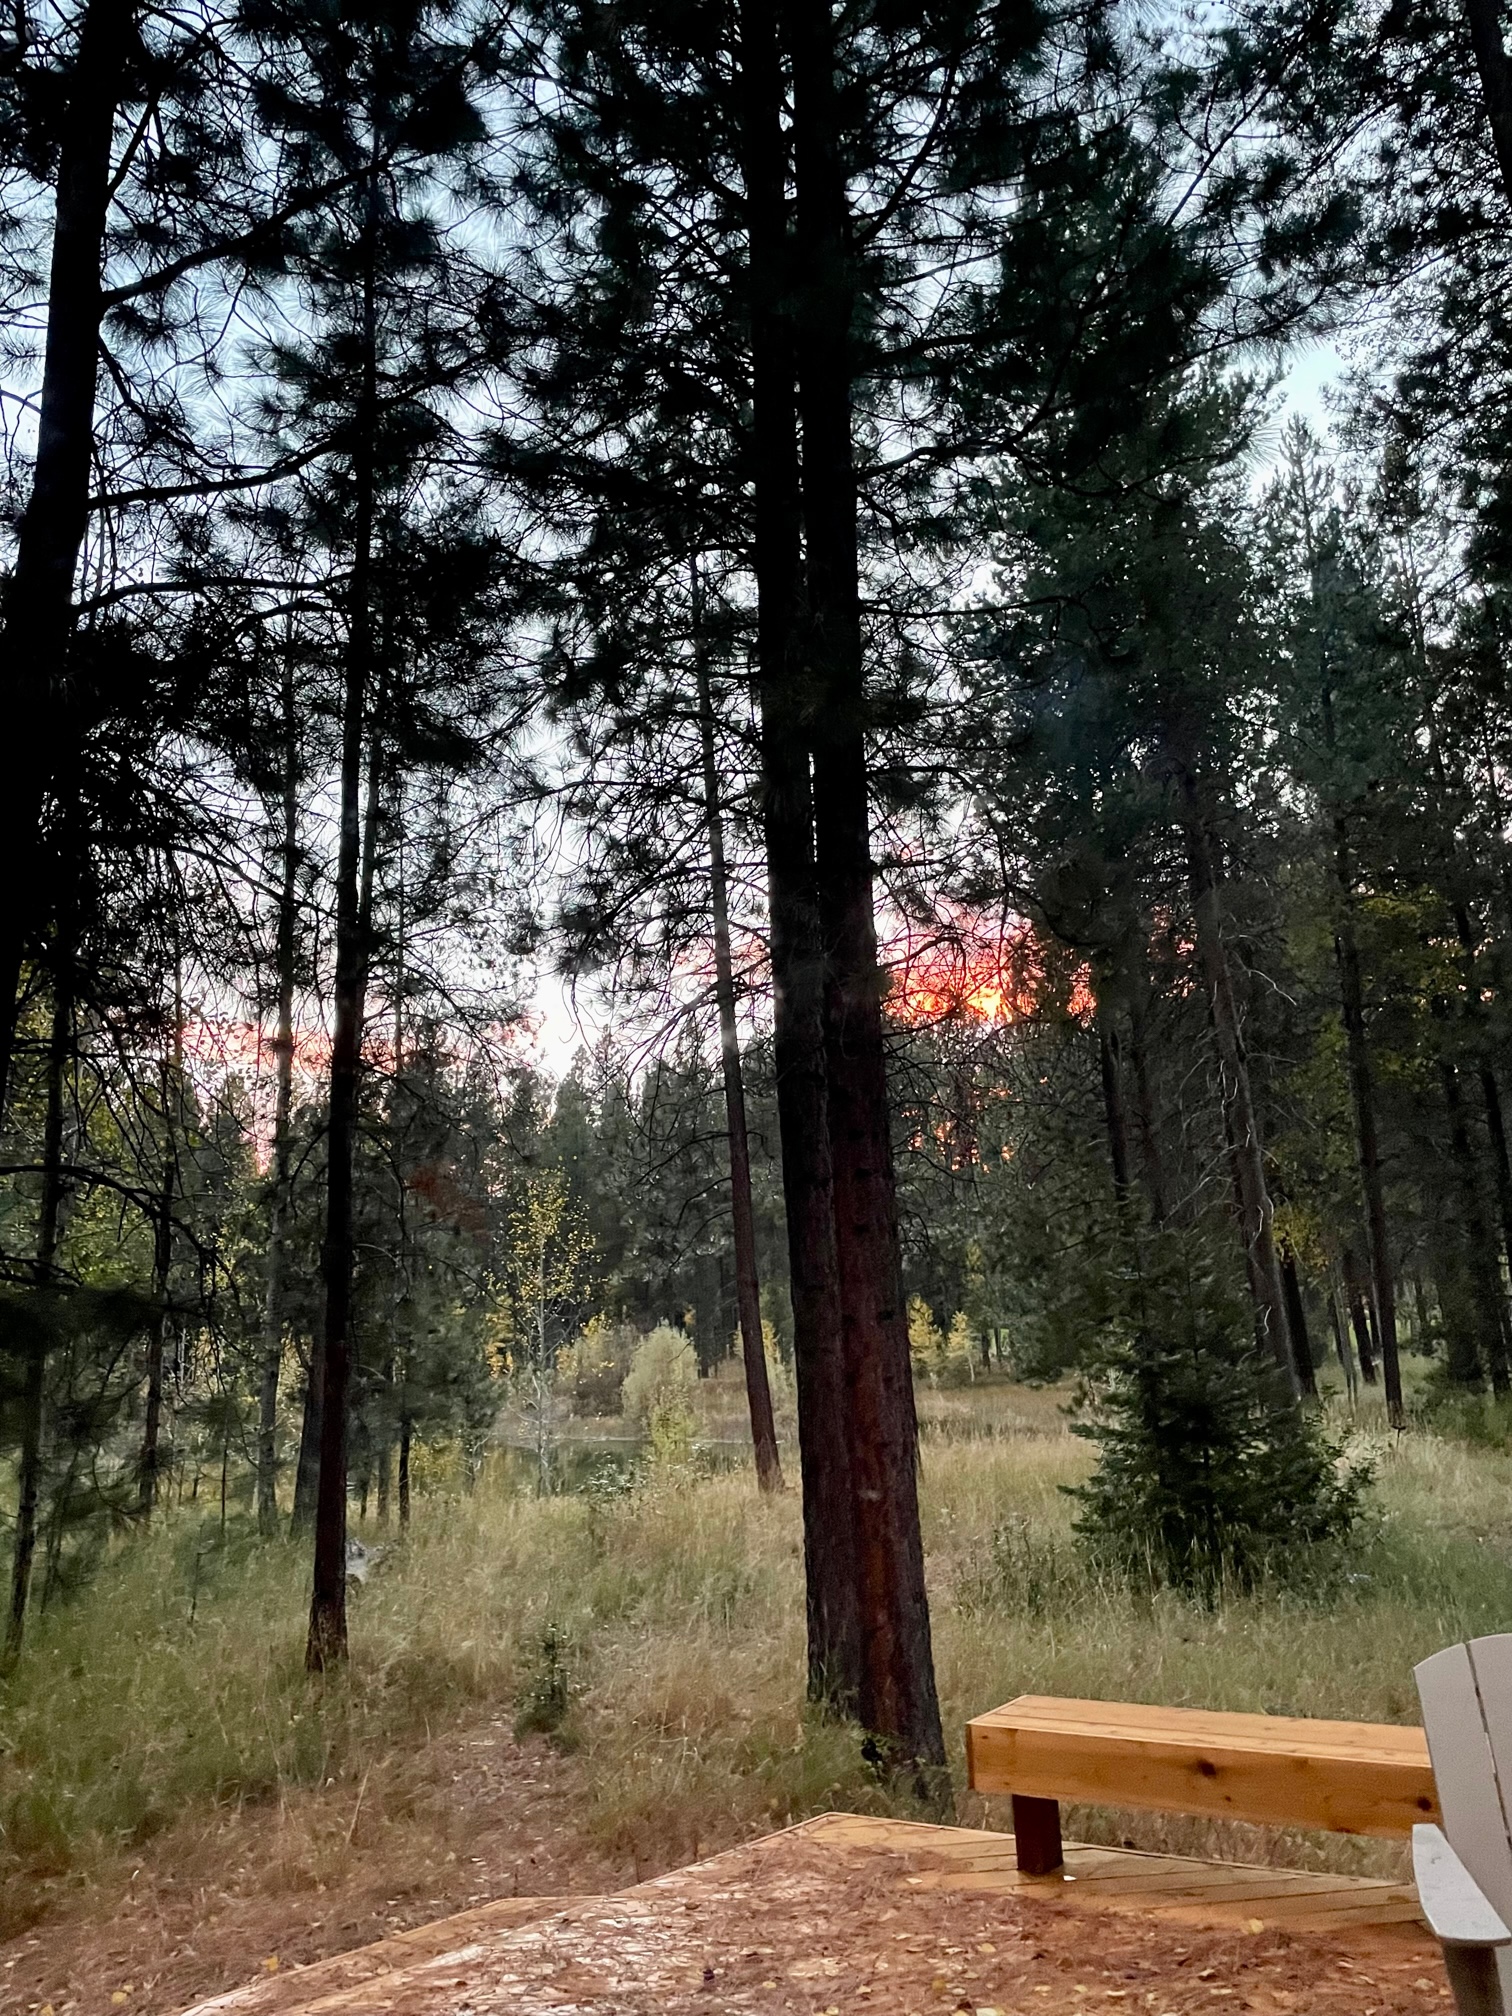 Sunset from the deck